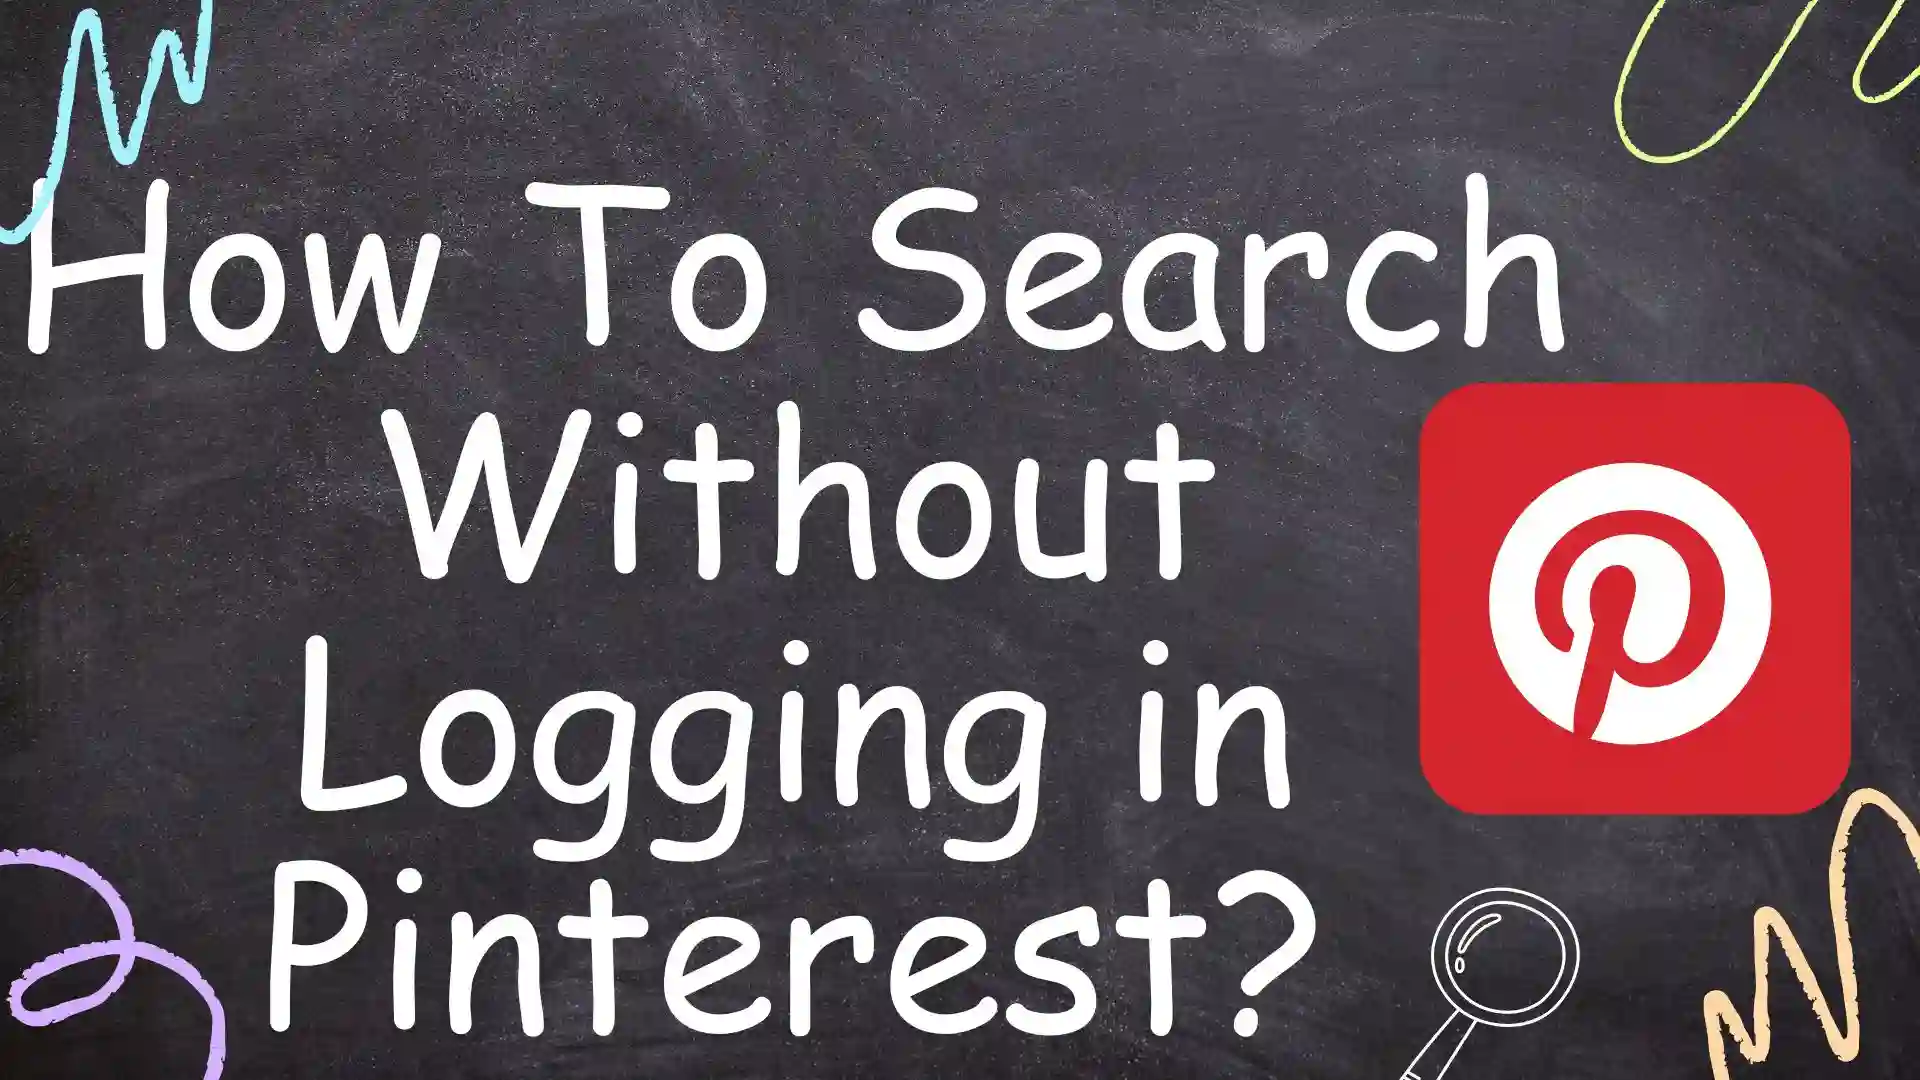 How to Search Pinterest without login